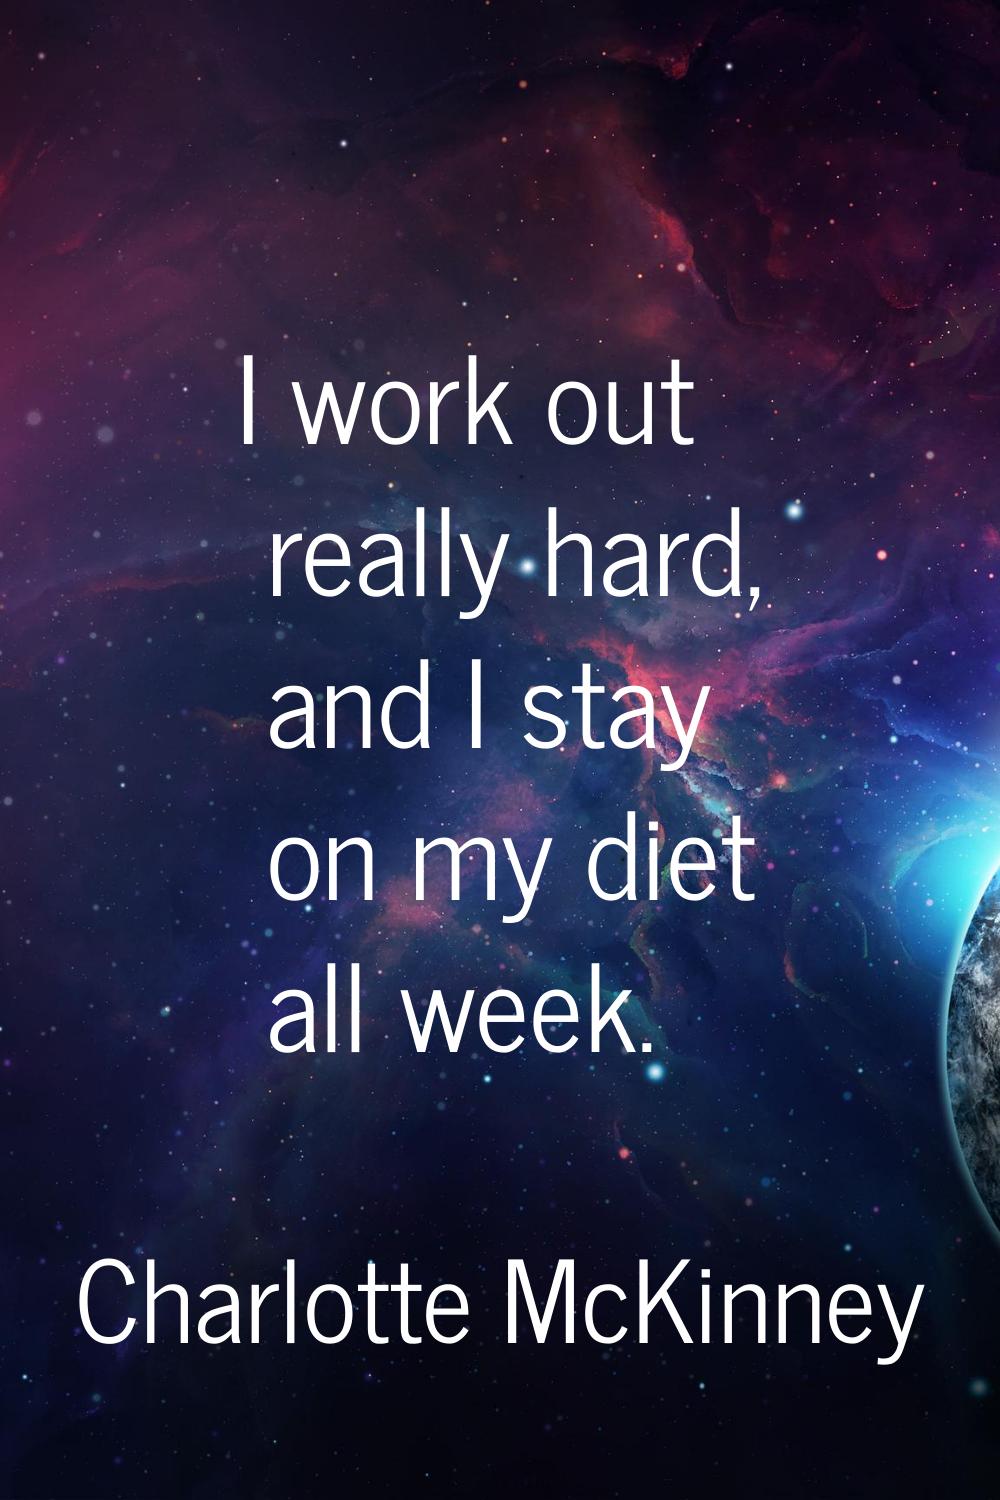 I work out really hard, and I stay on my diet all week.